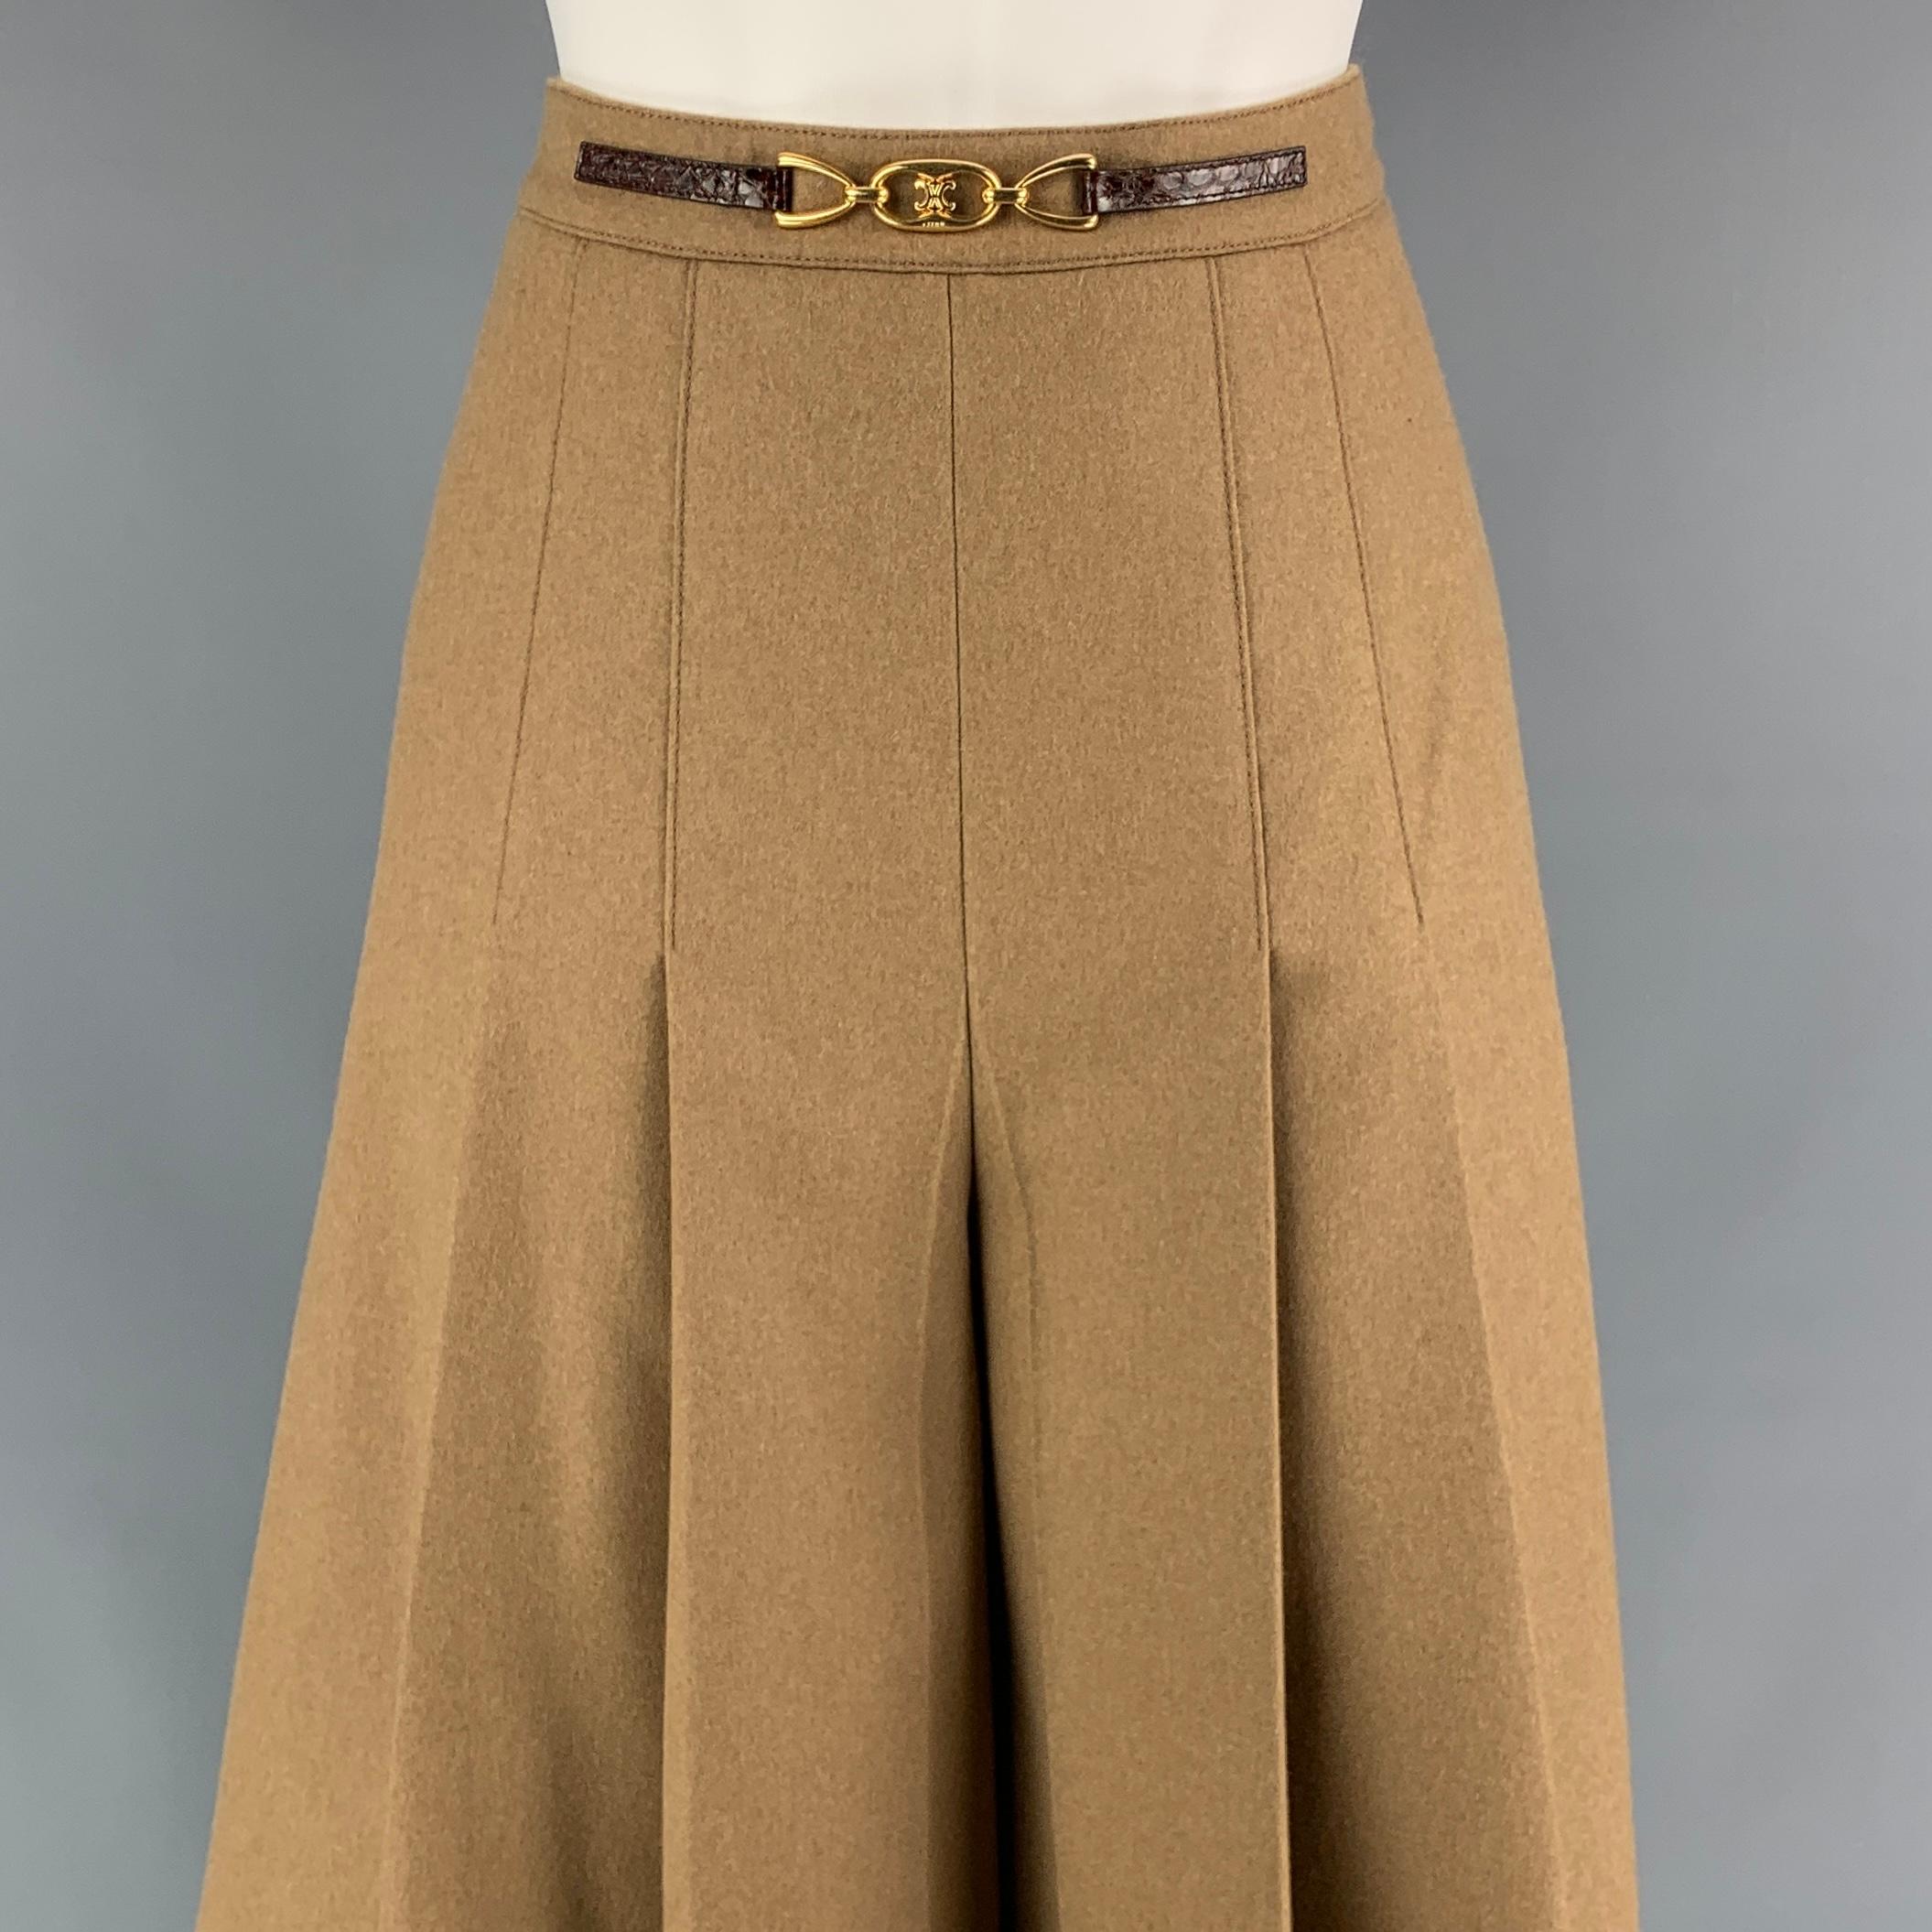 CELINE skirt pants comes in a camel pleated wool with a full liner featuring a alligator leather trim, gold tone hardware detail,high waisted, and a side zipper closure. Made in France. 

Very Good Pre-Owned Condition.
Marked: 36
Original Retail